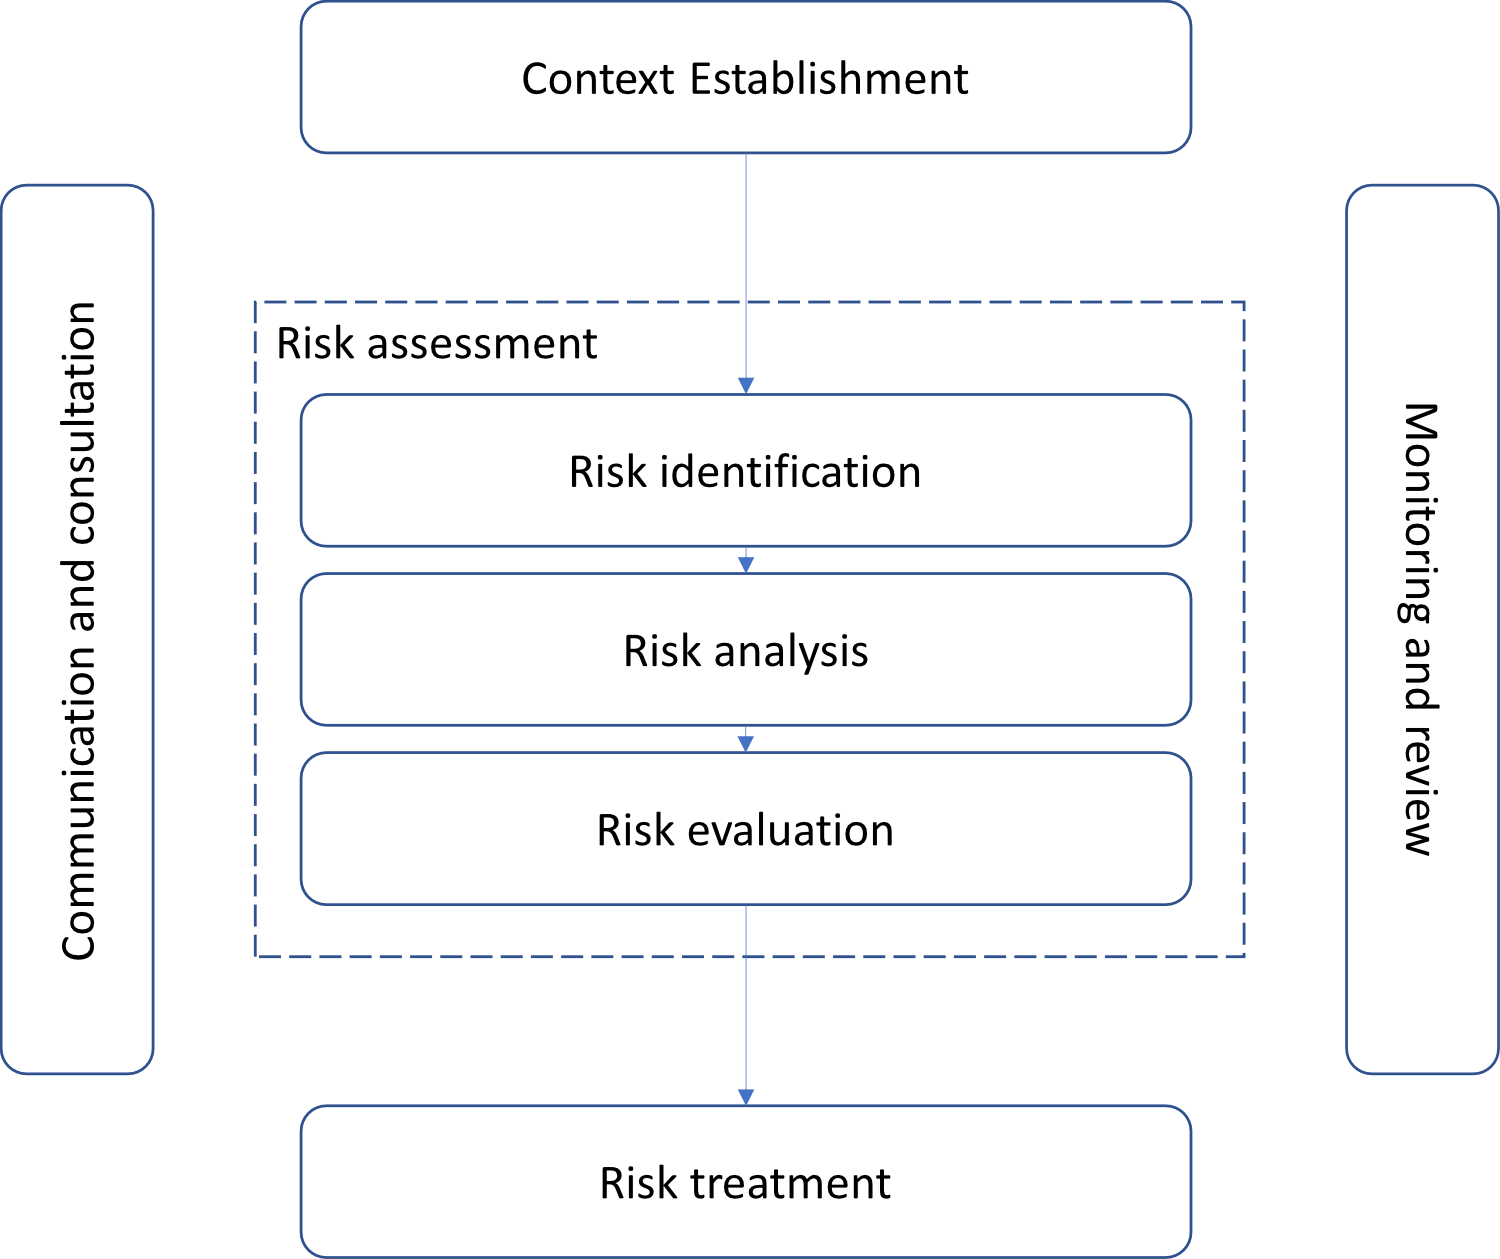 The main steps of the ISO 27005 standard